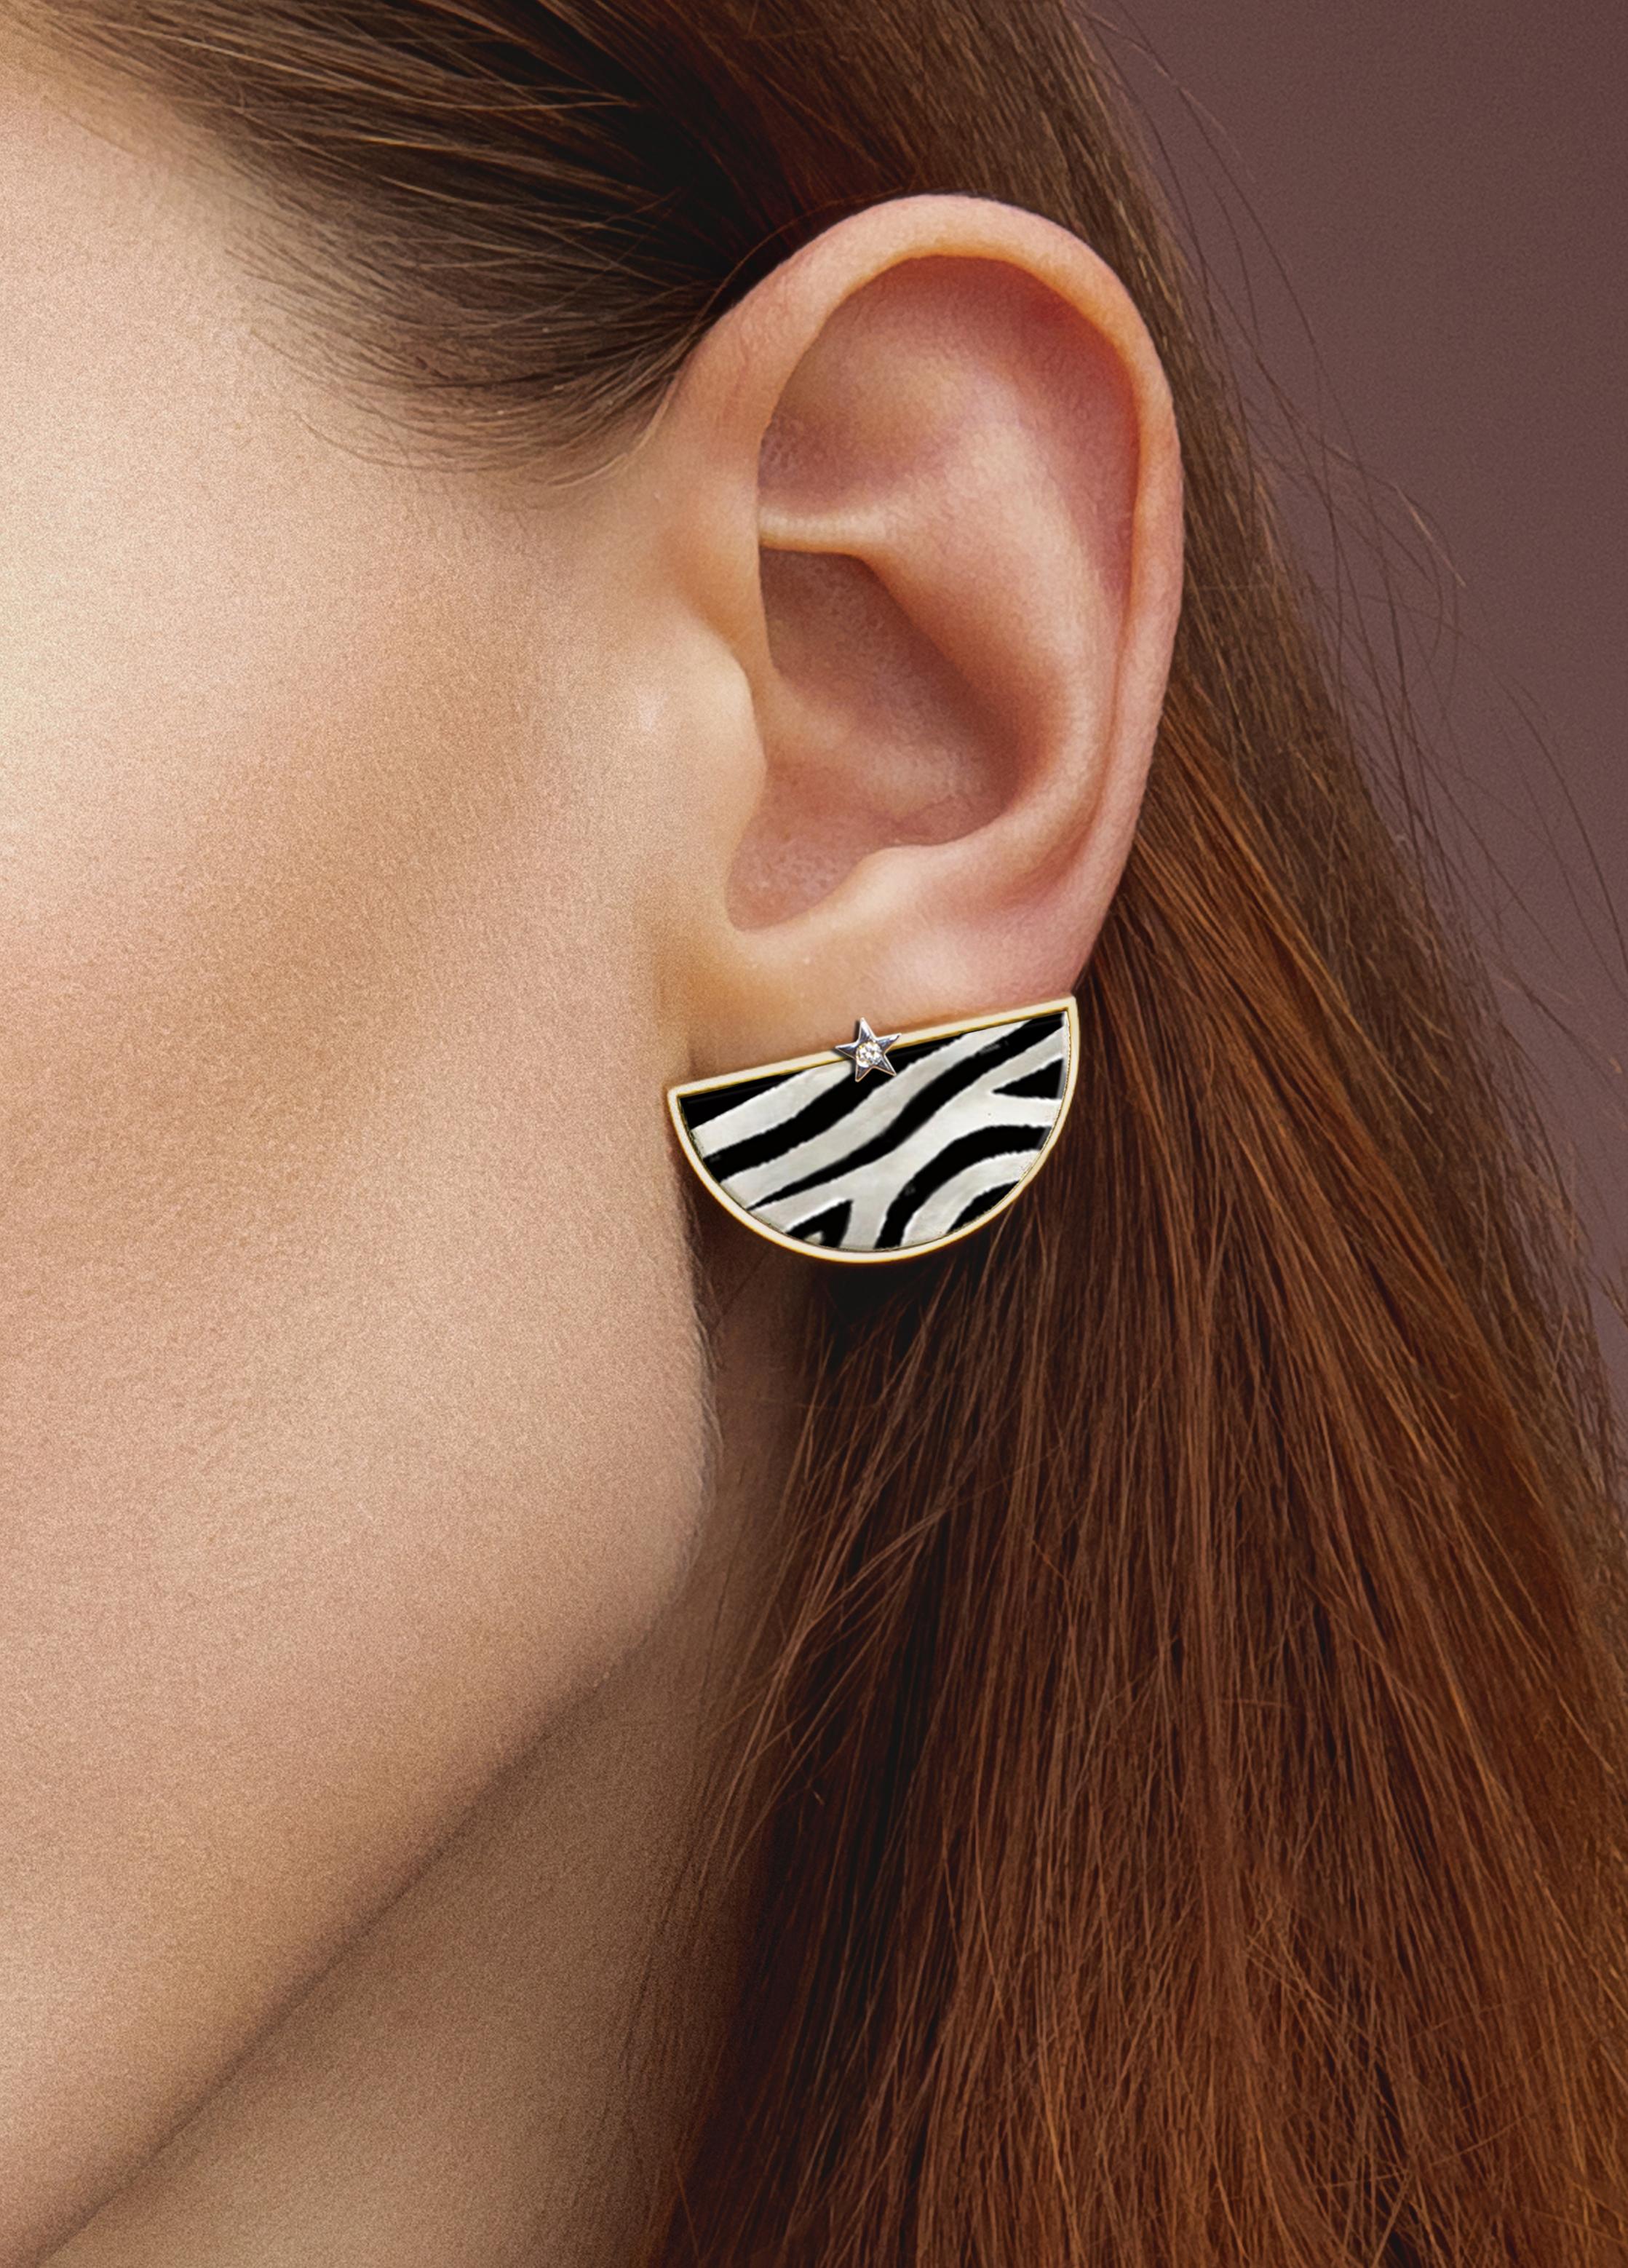 18 kt yellow gold Half moon Earrings , white gold stars with diamonds, Hand Painted and Laquered Stone, Zebra style